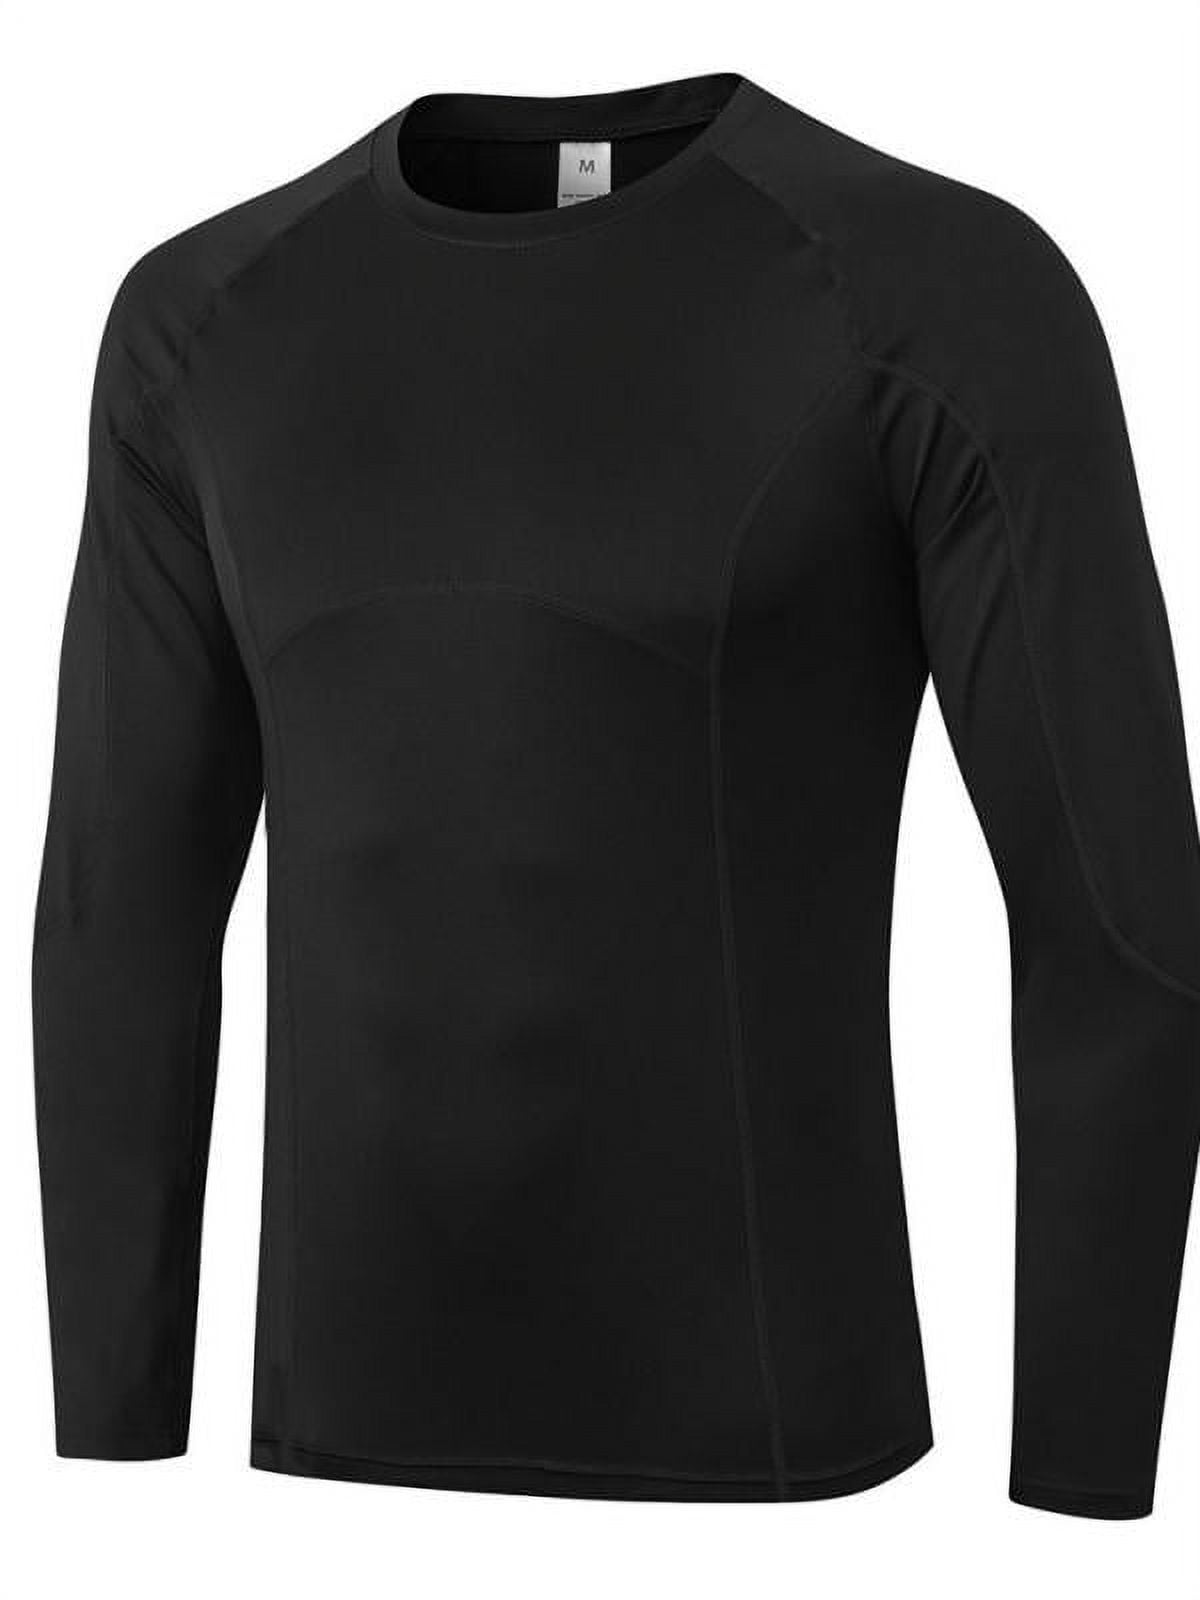 CE' CERDR Long Sleeve Shirts for Men - Quick Dry Moisture Wicking Sun  Protection Long Sleeve Tee Shirts for Workout Running